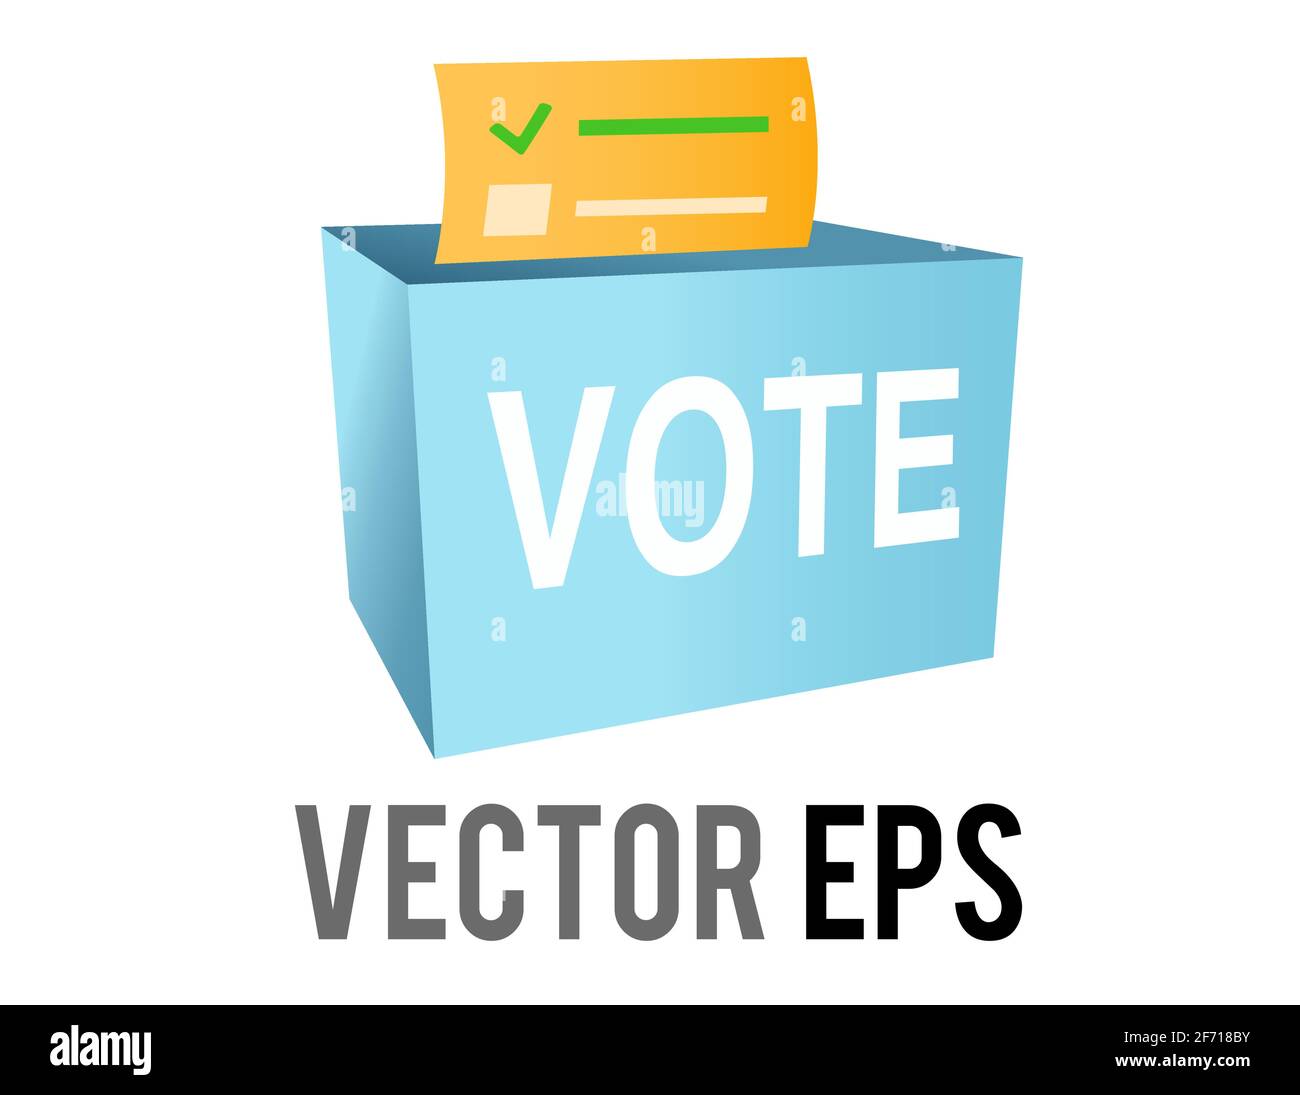 The isolated vector blue ballot box icon with slot, casting vote for voting and elections politics and government Stock Vector